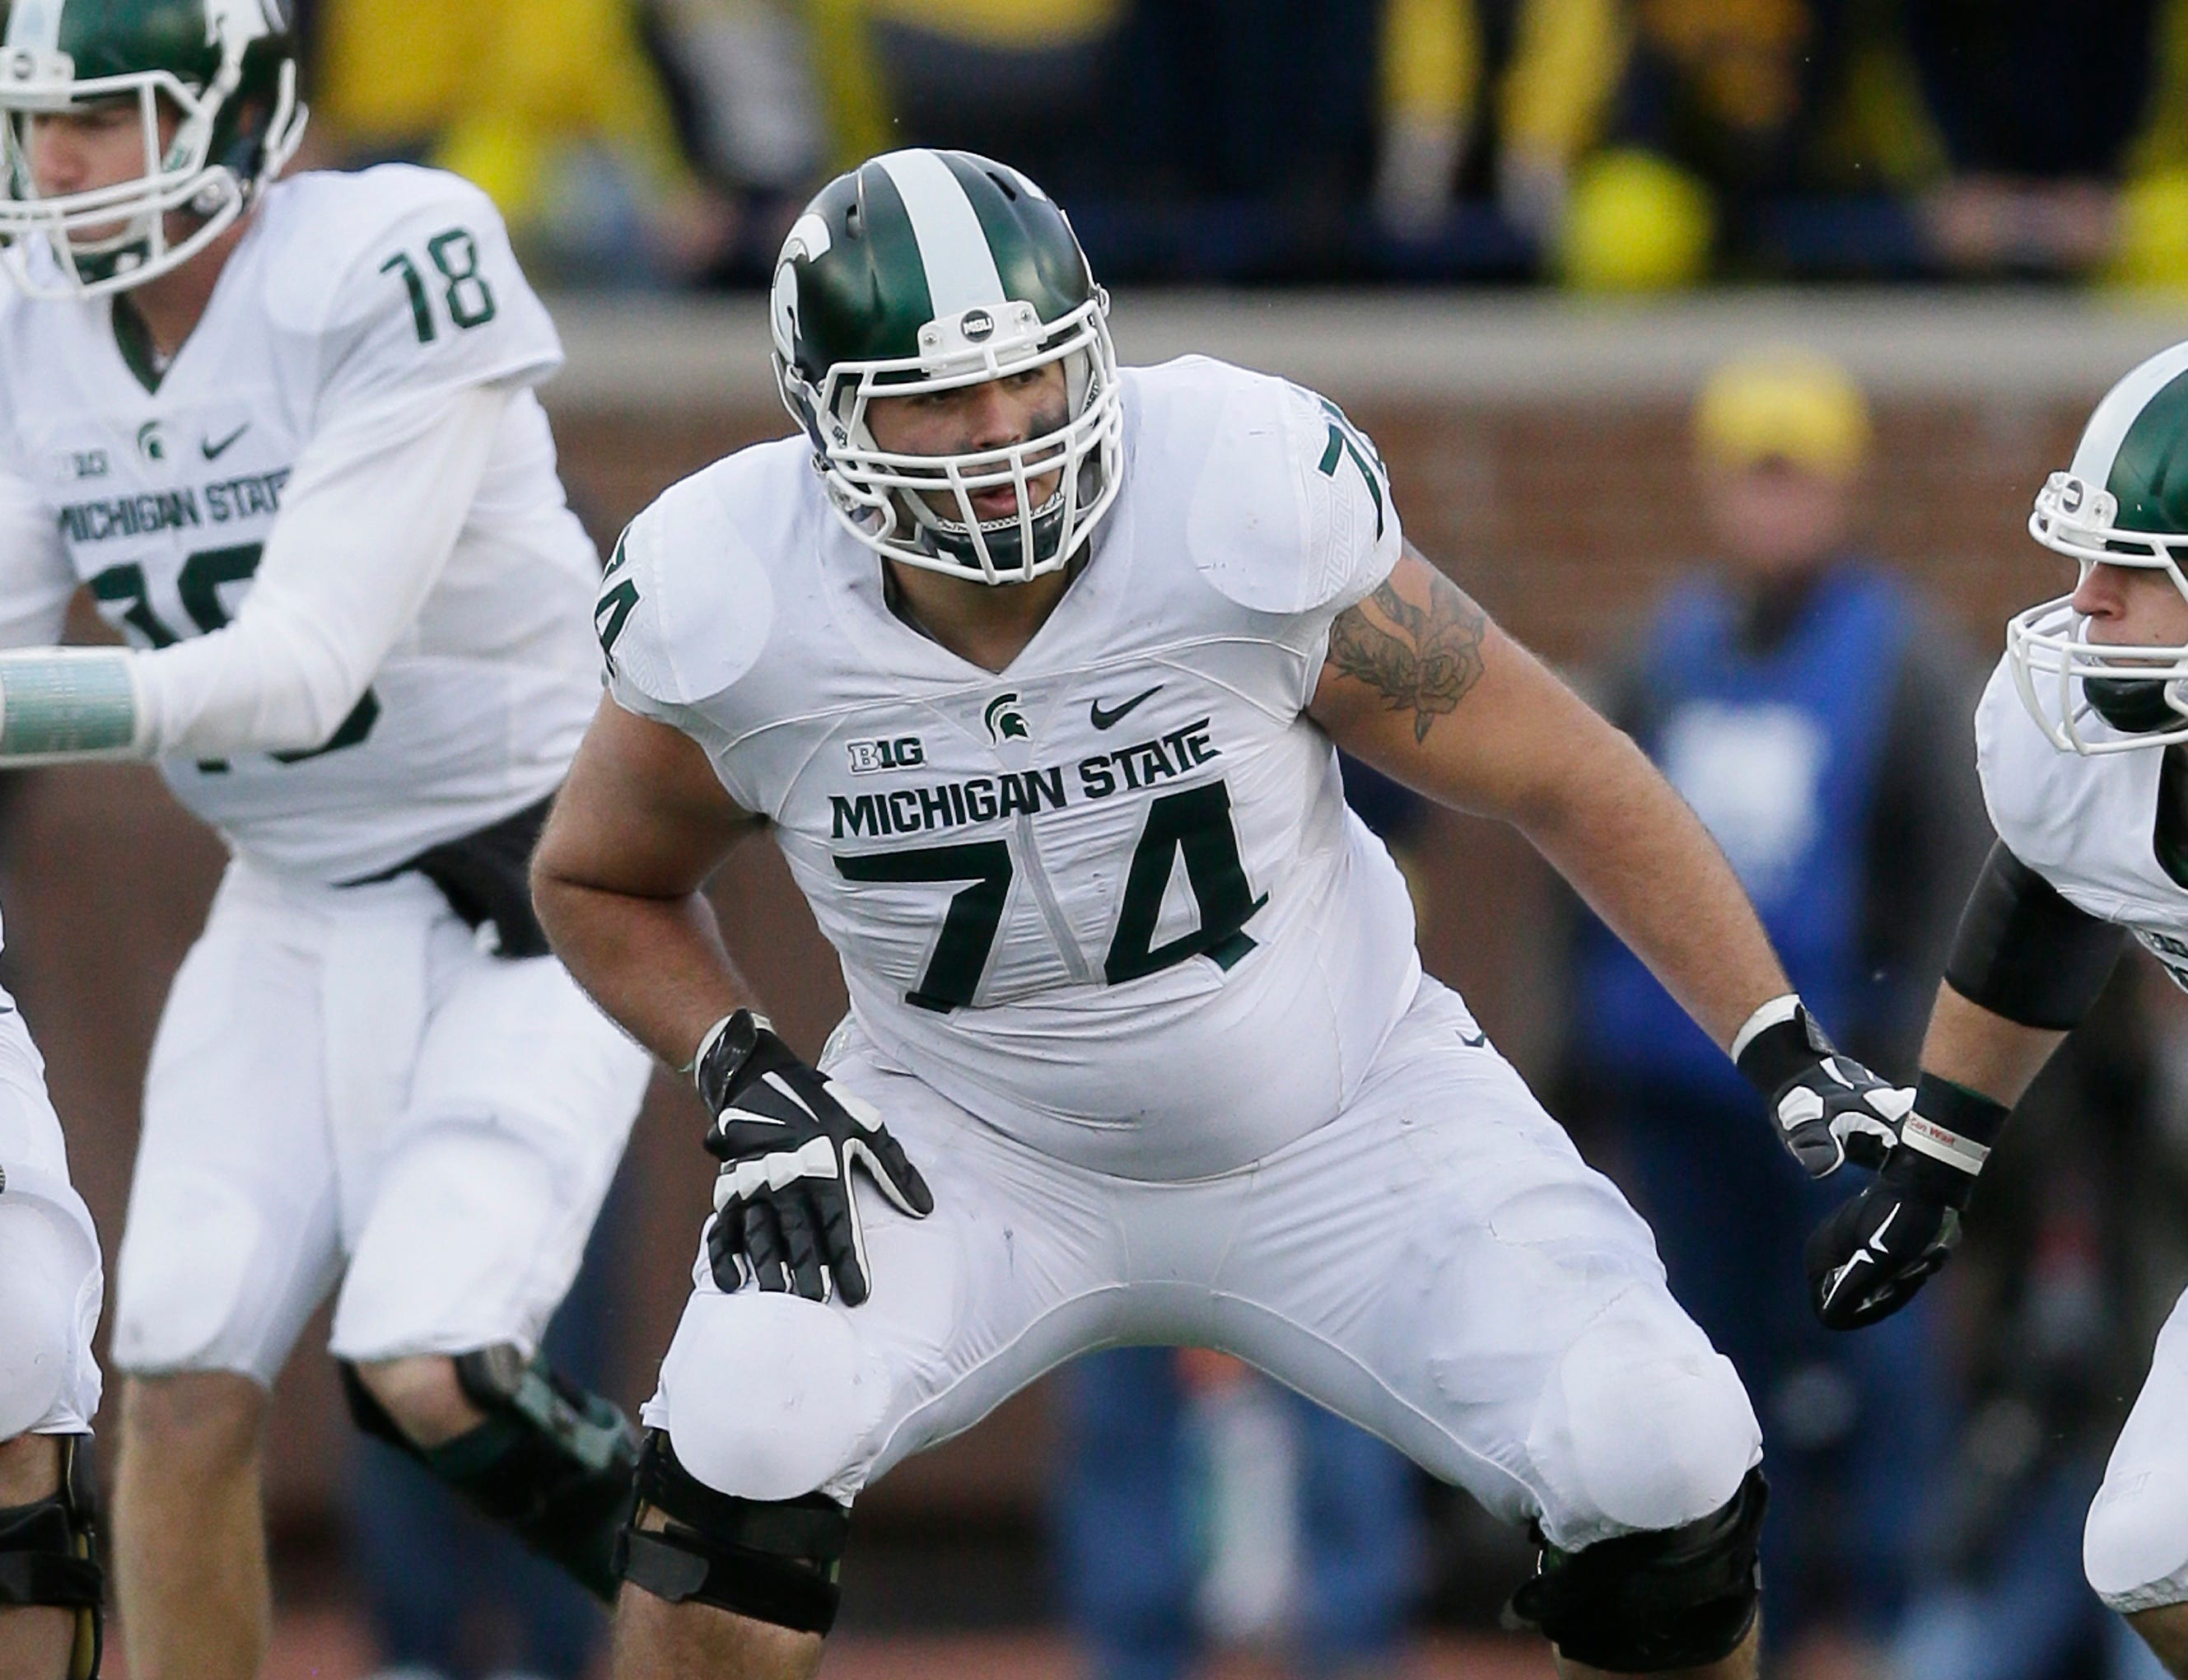 OFFENSIVE LINE – Jack Conklin, 2013-15: The former walk-on was named a first-team All-American as a junior and the following spring became the first Spartan offensive lineman to be picked in the first round since Tony Mandarich in 1989. Conklin started 38 of 39 career games (35 at left tackle and three at right tackle) and was part of Michigan State’s record-breaking 2014 offense before reaching the College Football Playoff in 2015.